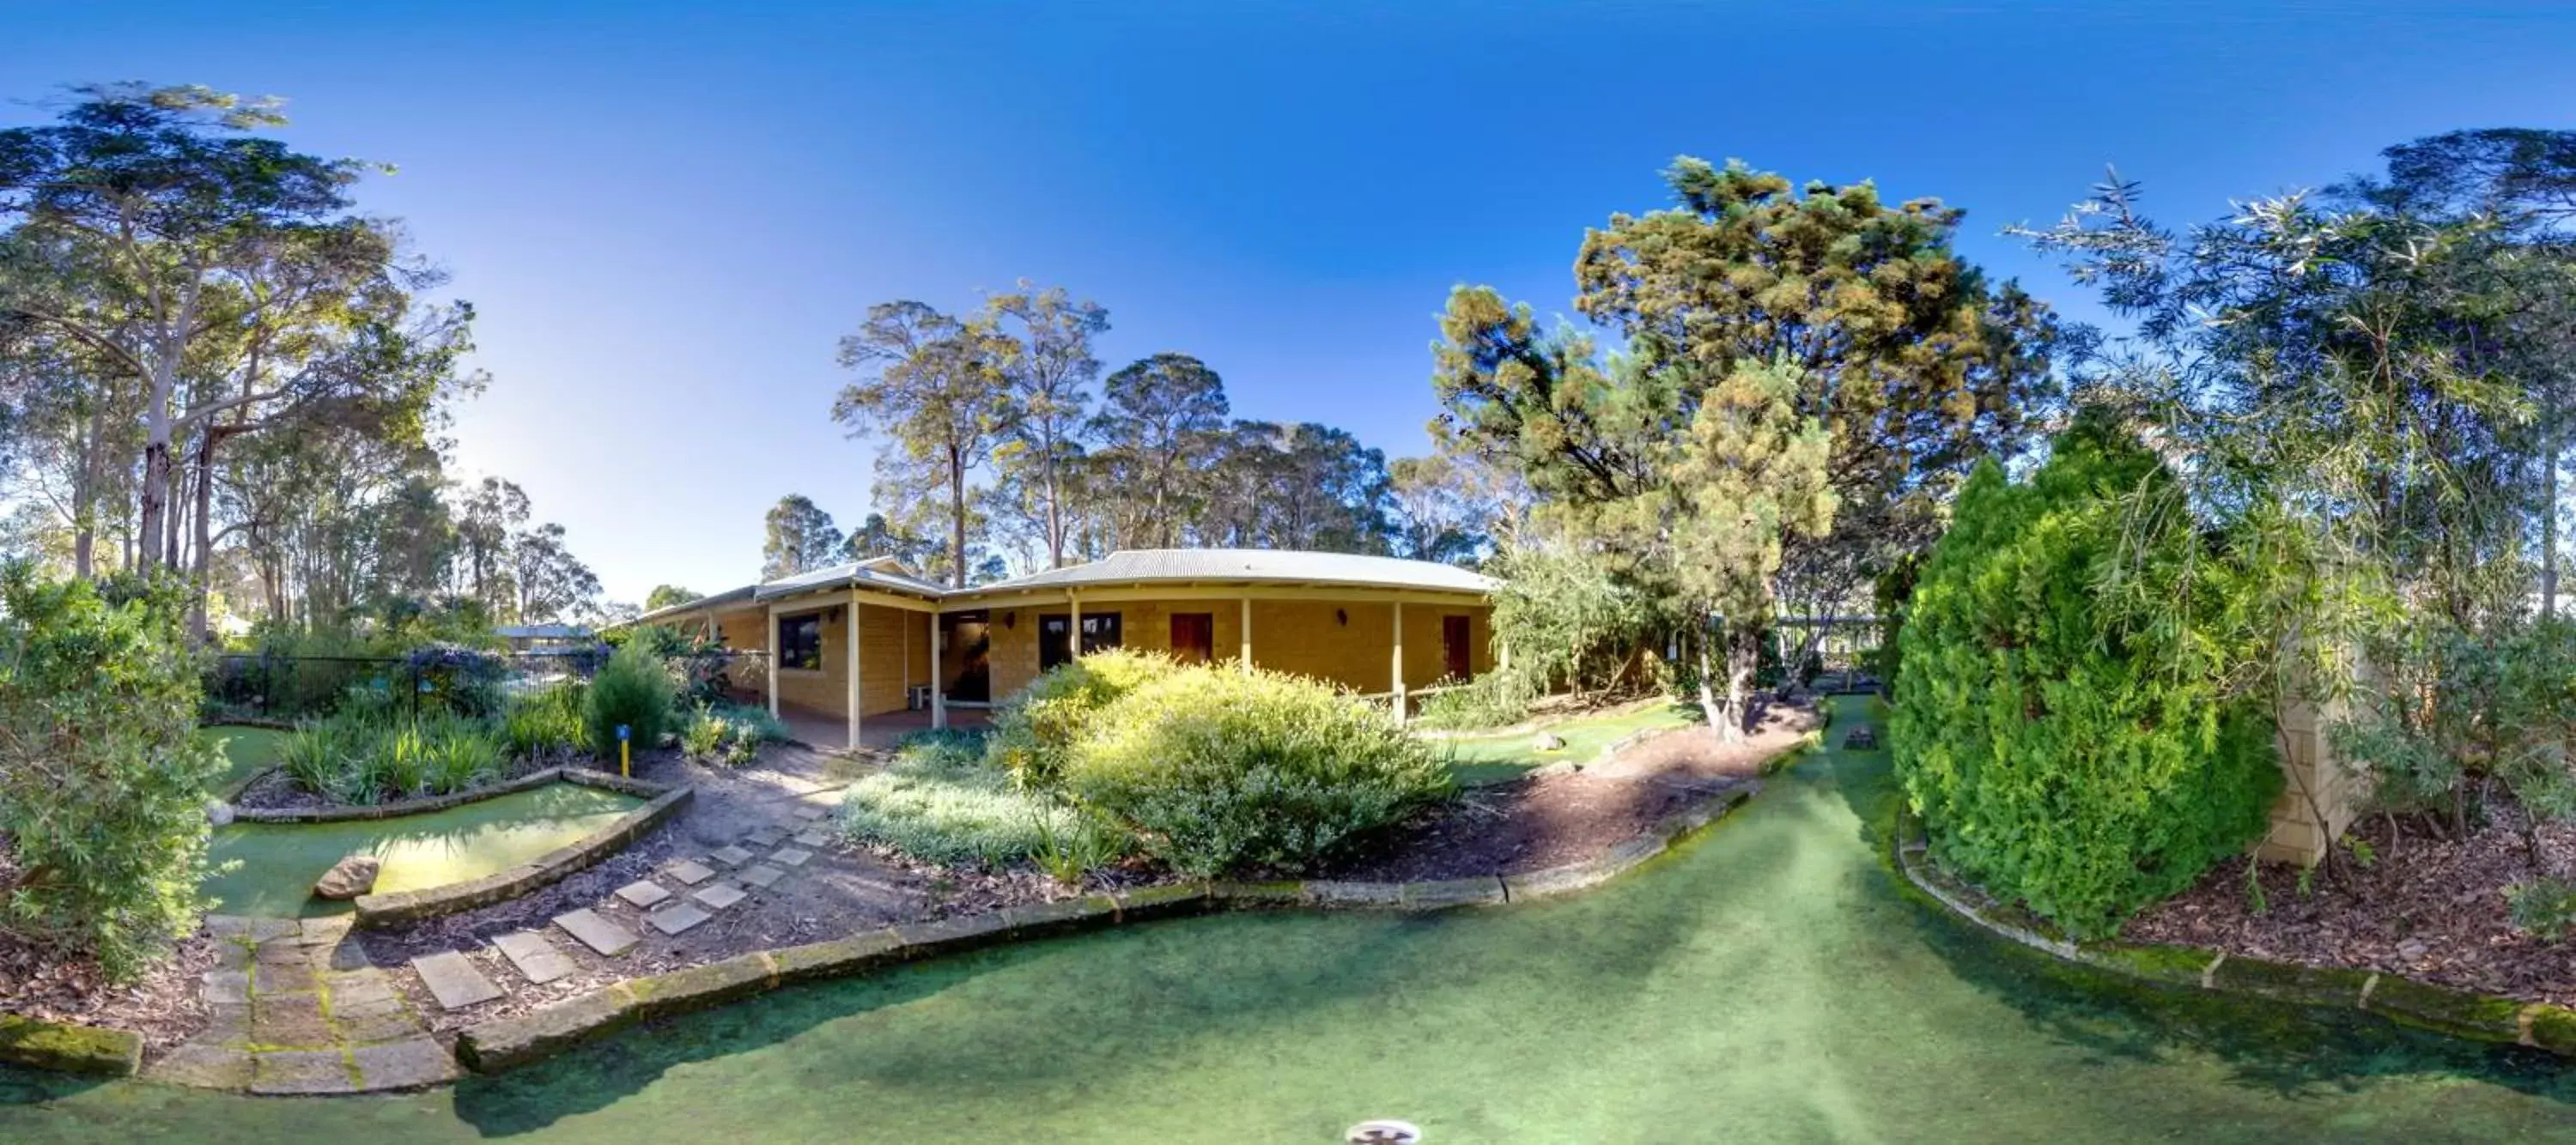 Property Building in Stay Margaret River